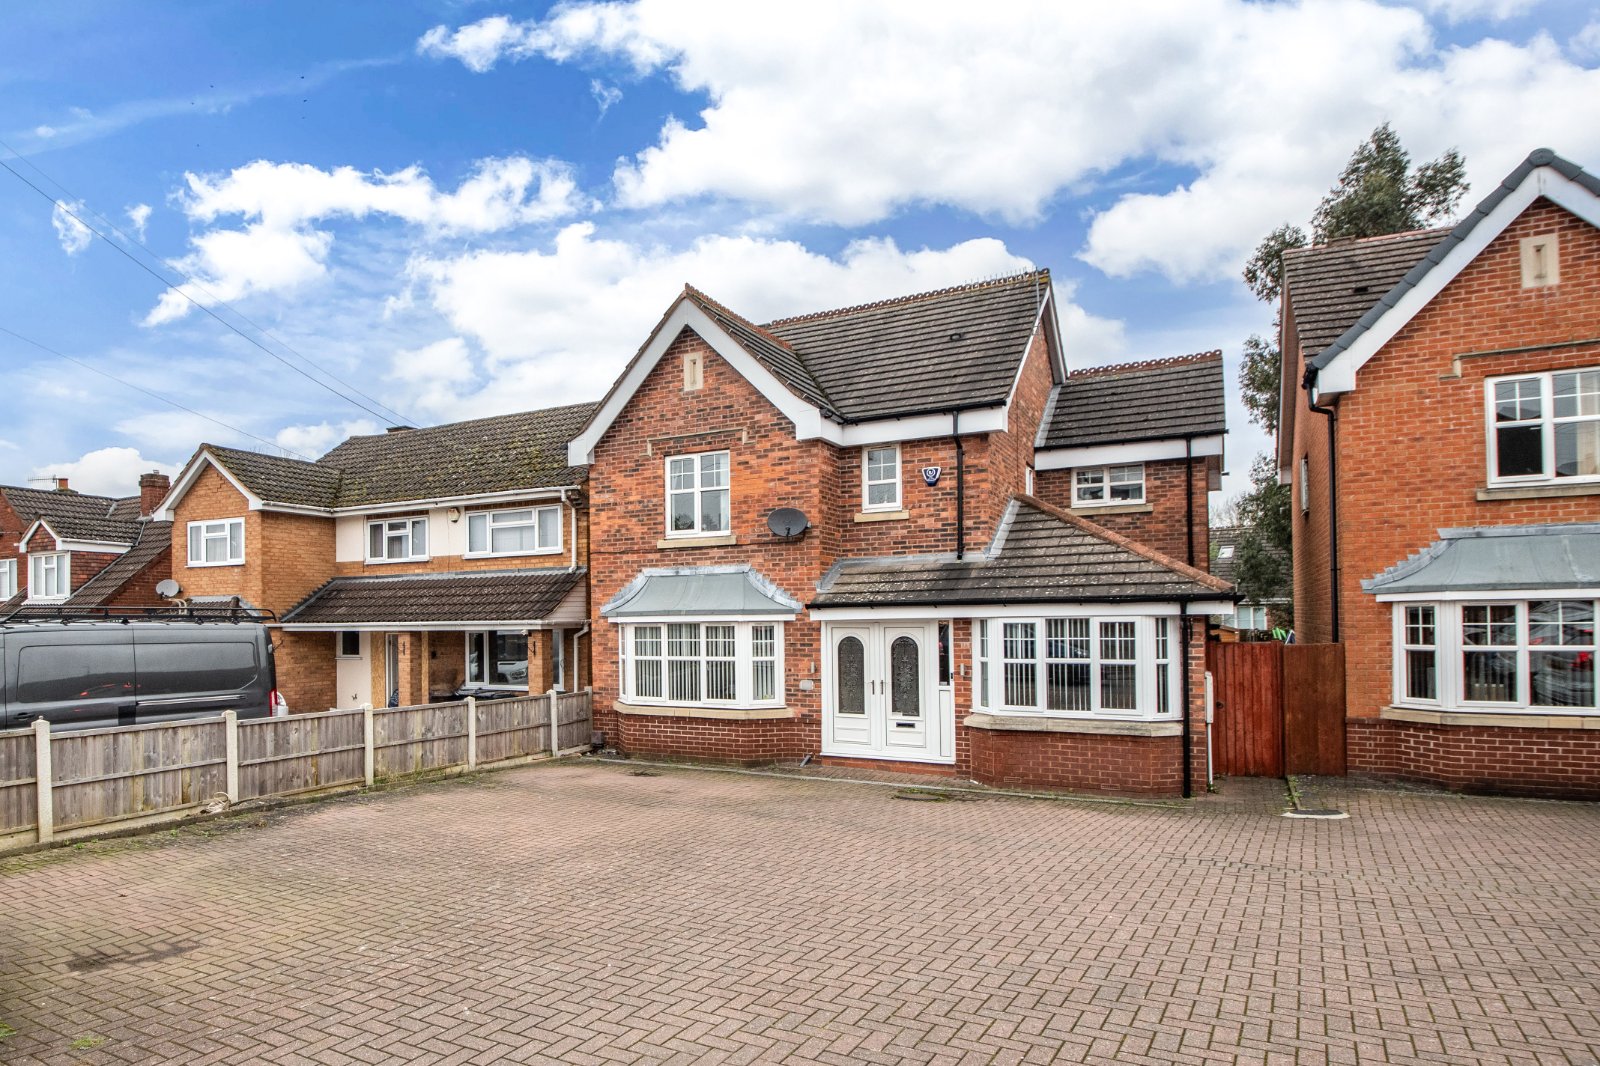 4 bed house for sale in Golden Cross Lane, Catshill  - Property Image 15